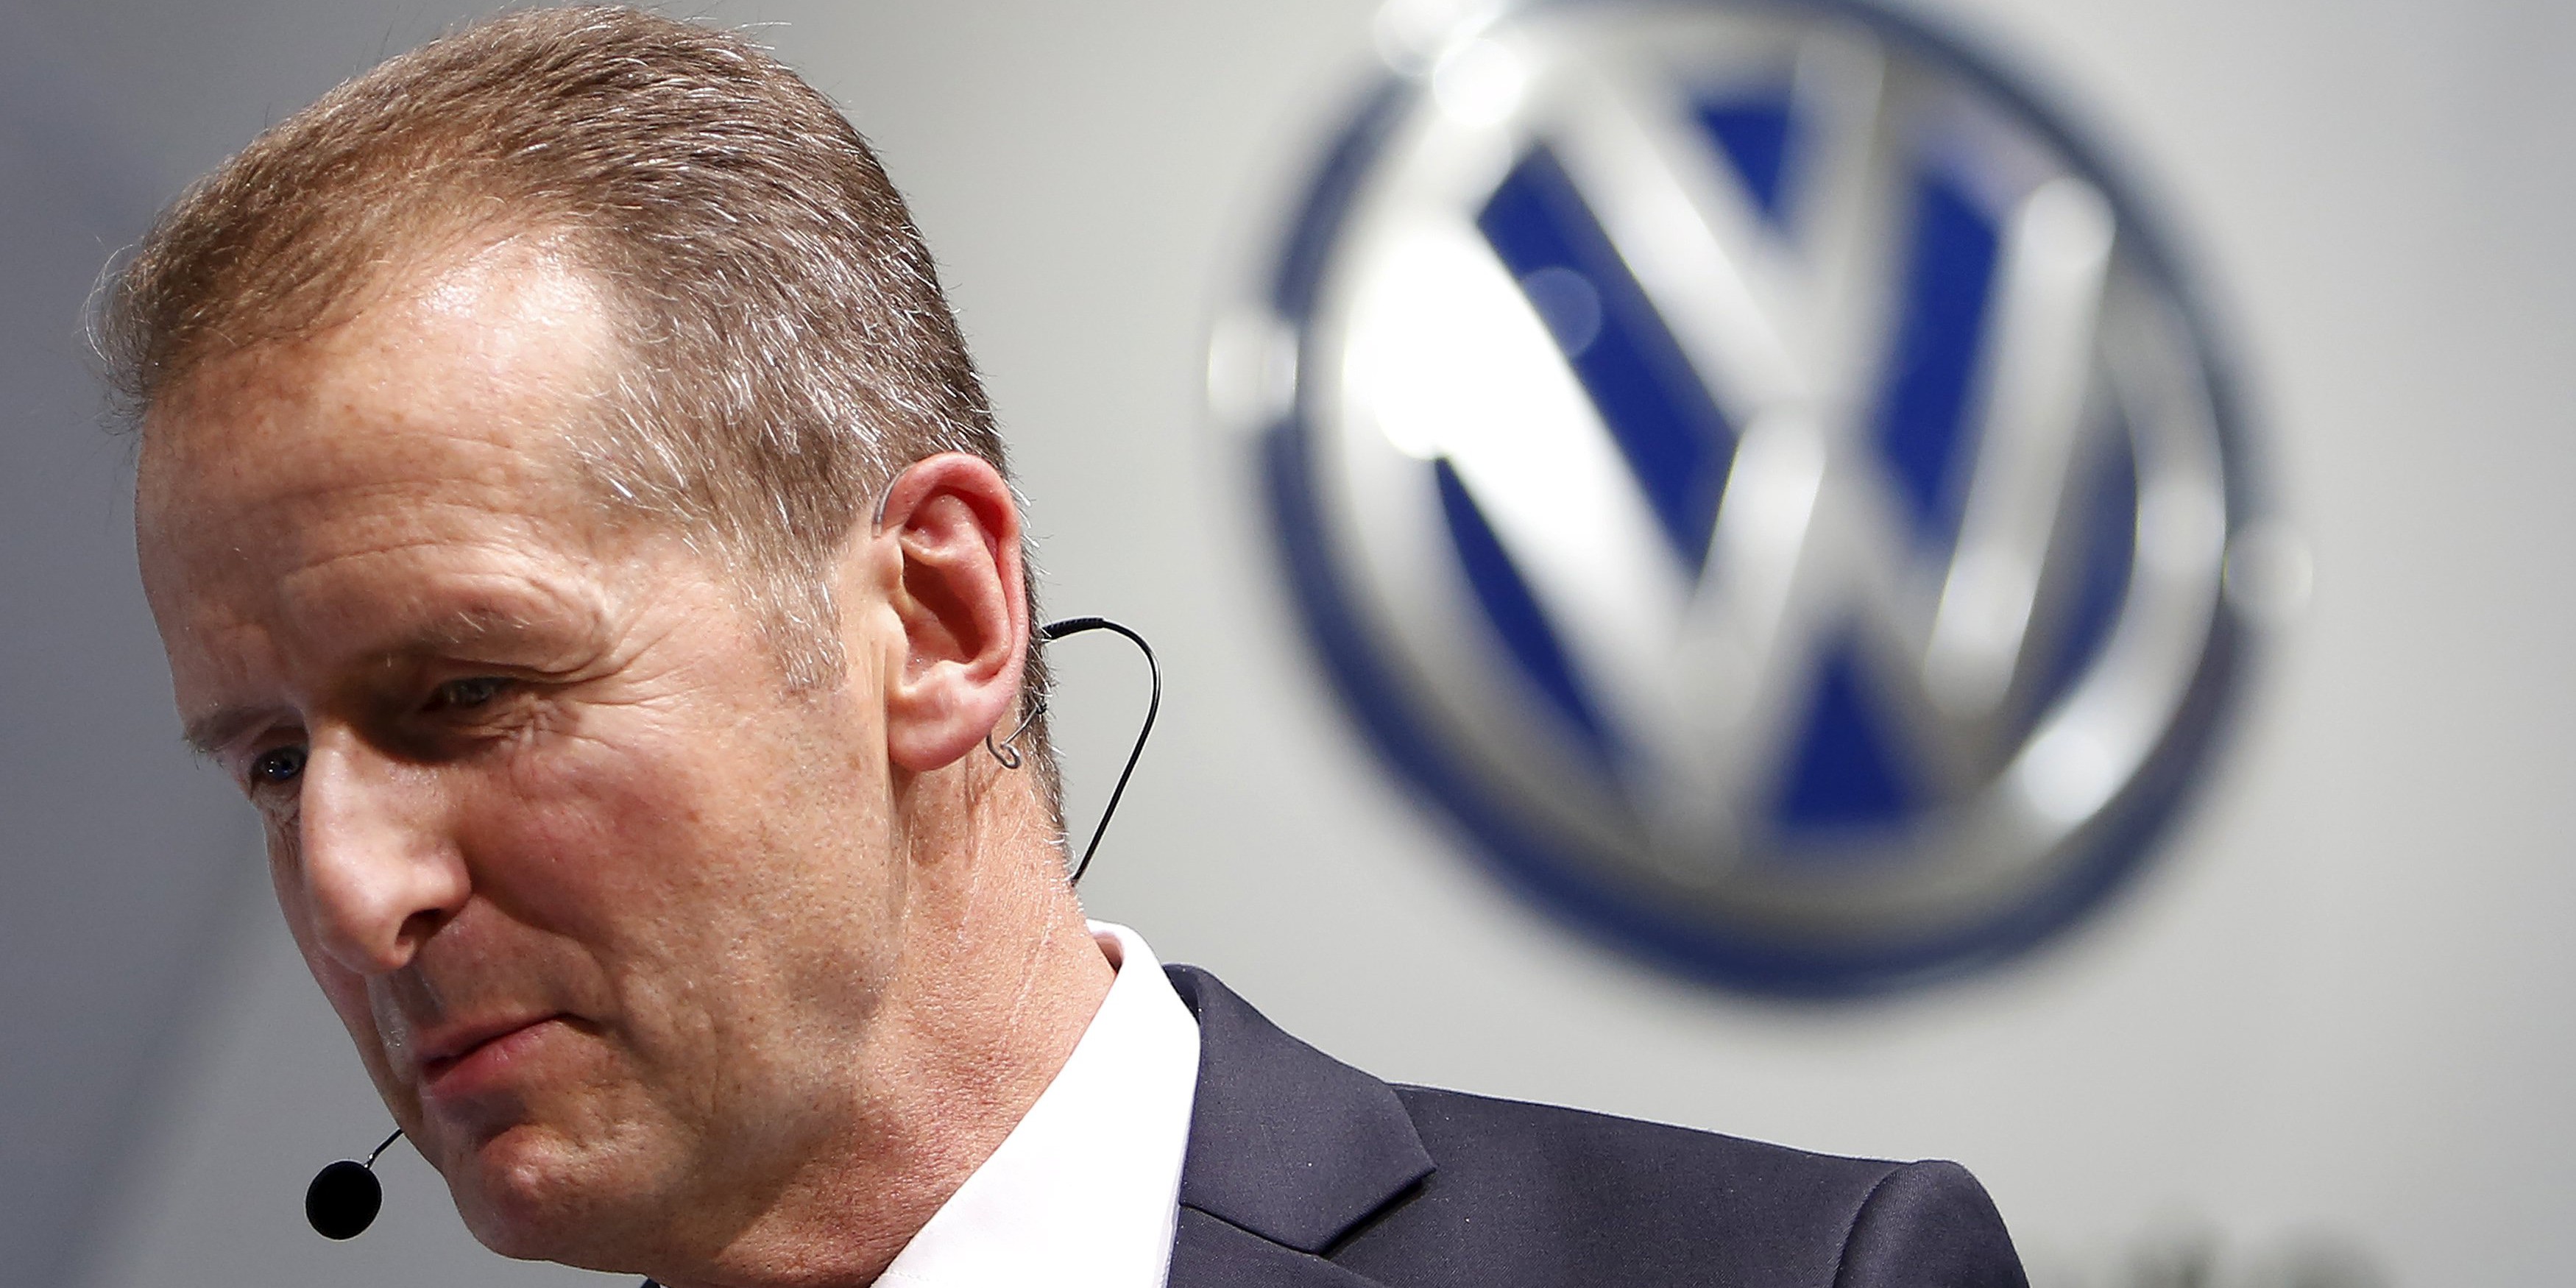 Tesla is a serious competitor, says VW CEO as he defends the electric automaker